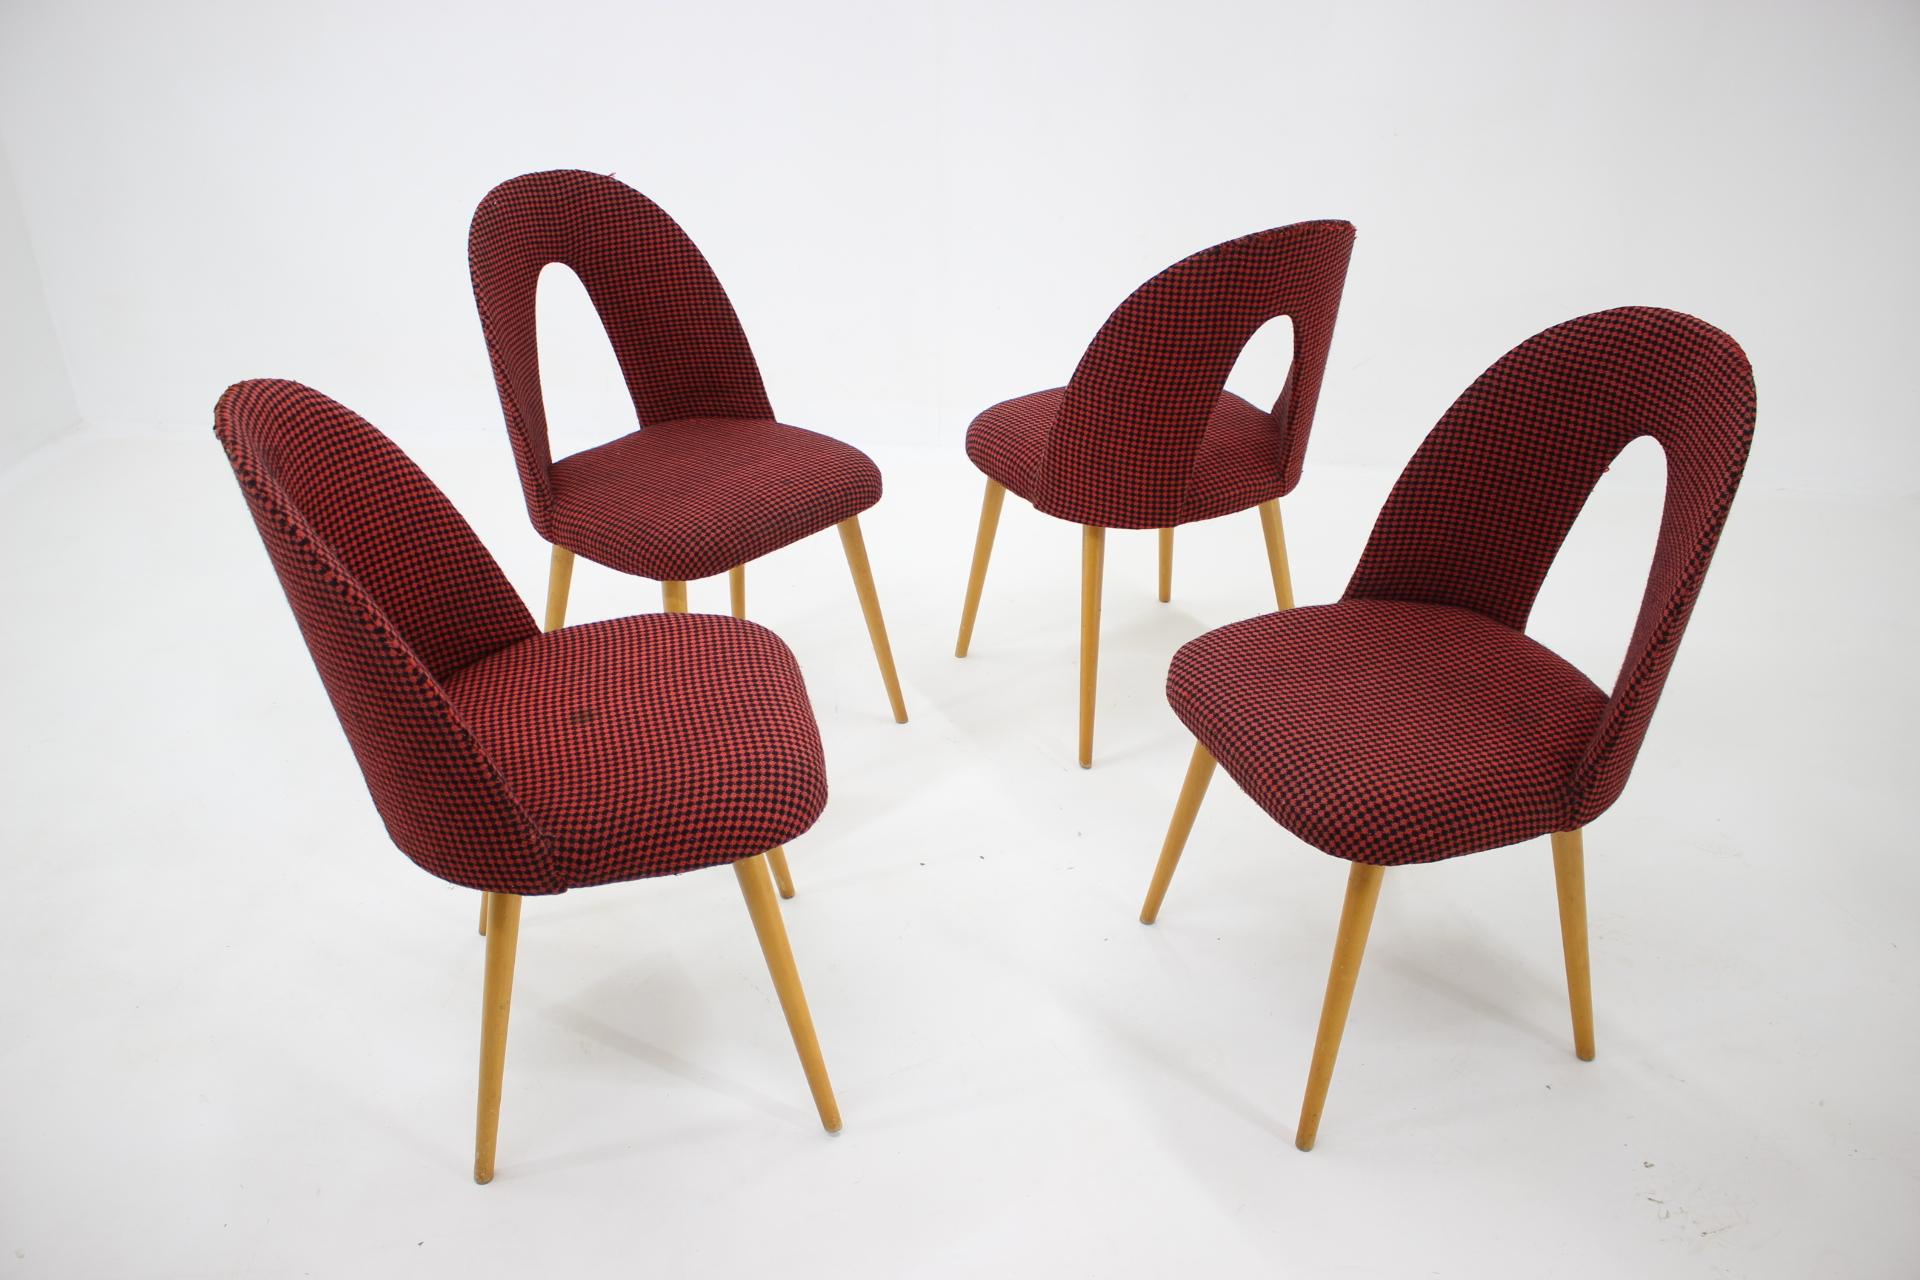 1960s Antonin Suman Set of Four Dining Chairs, Czechoslovakia For Sale 1